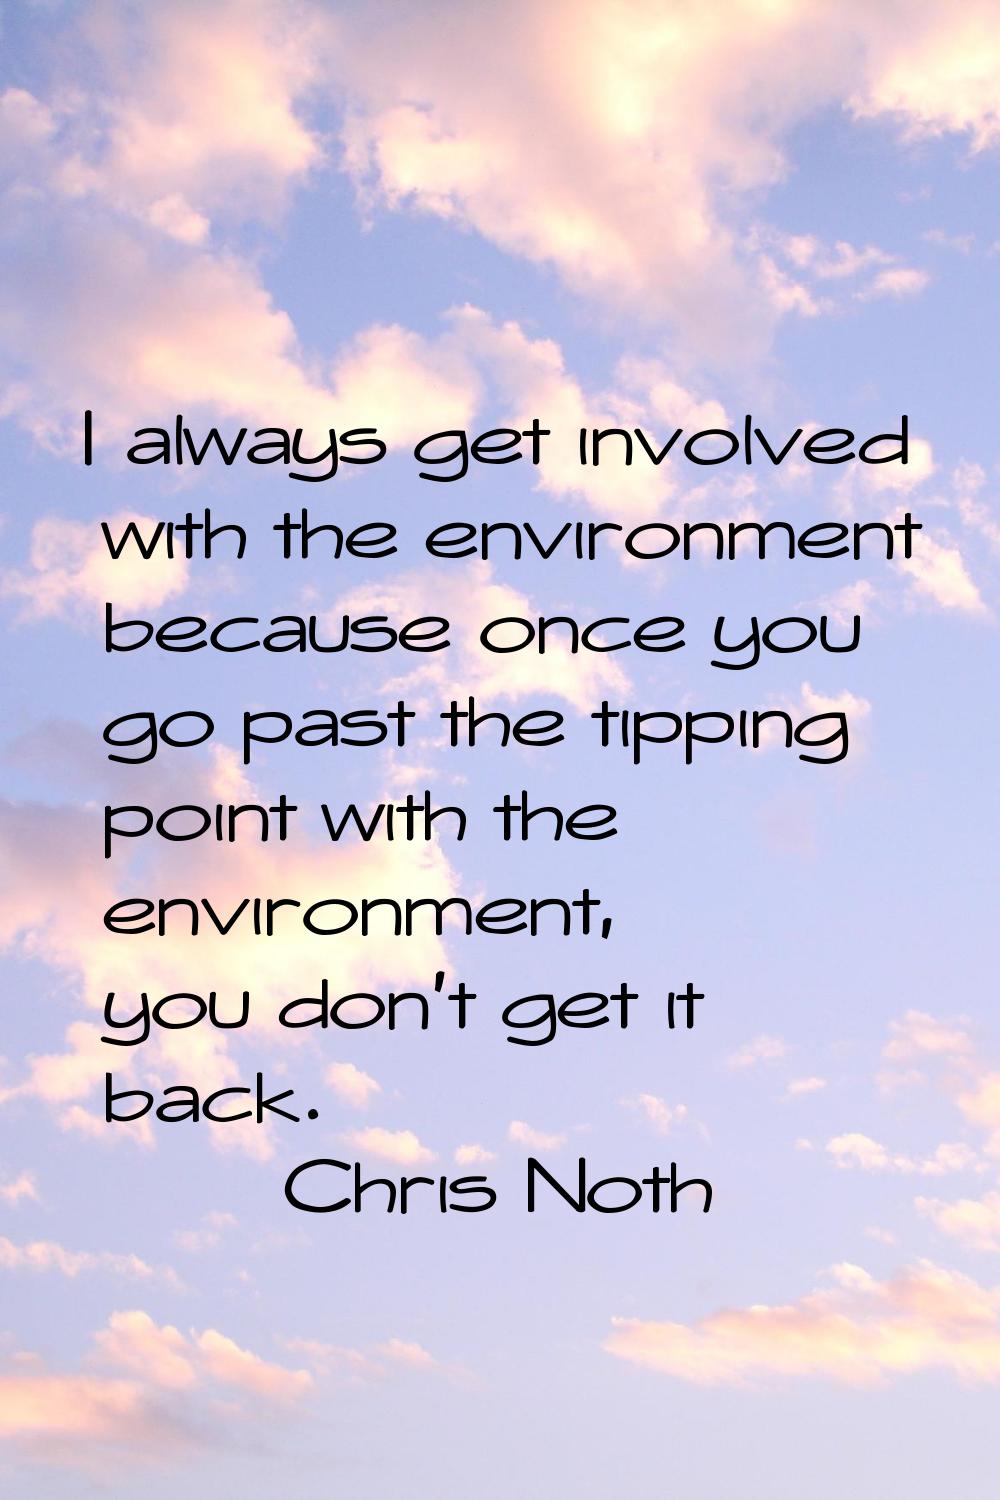 I always get involved with the environment because once you go past the tipping point with the envi